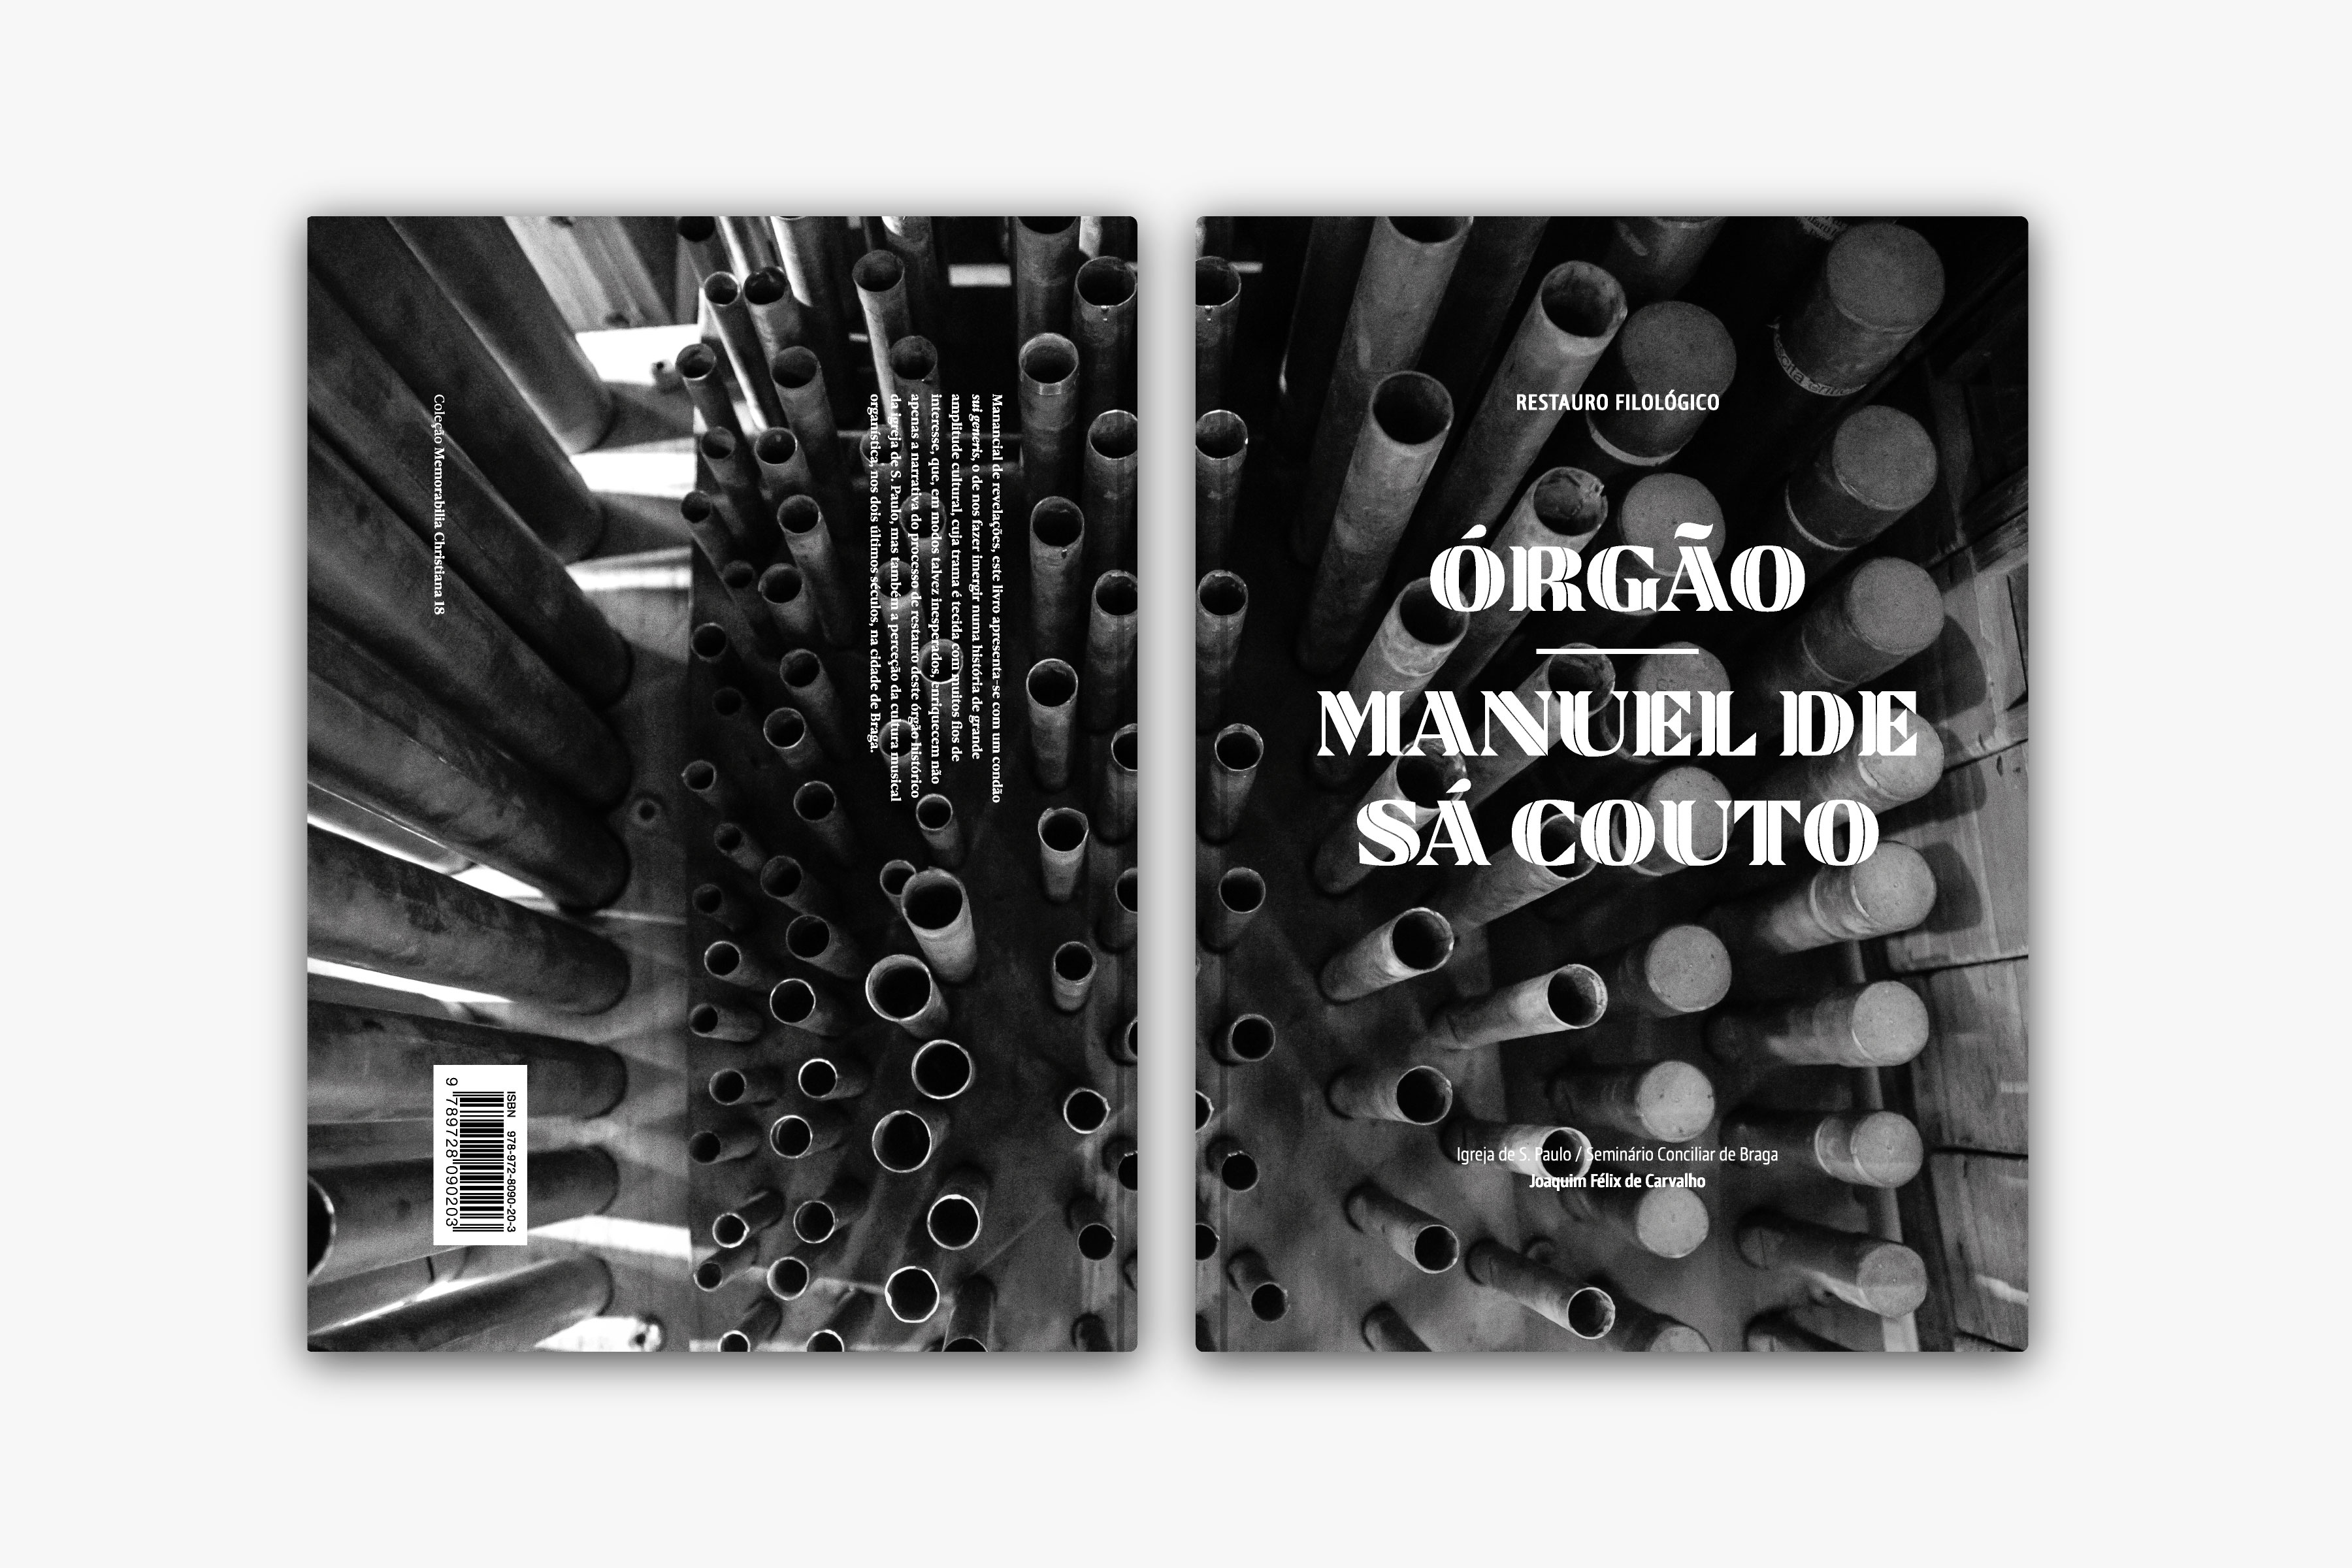 Book Philological Restoration - Pipe Organ by Afonso Designers - Creative Work